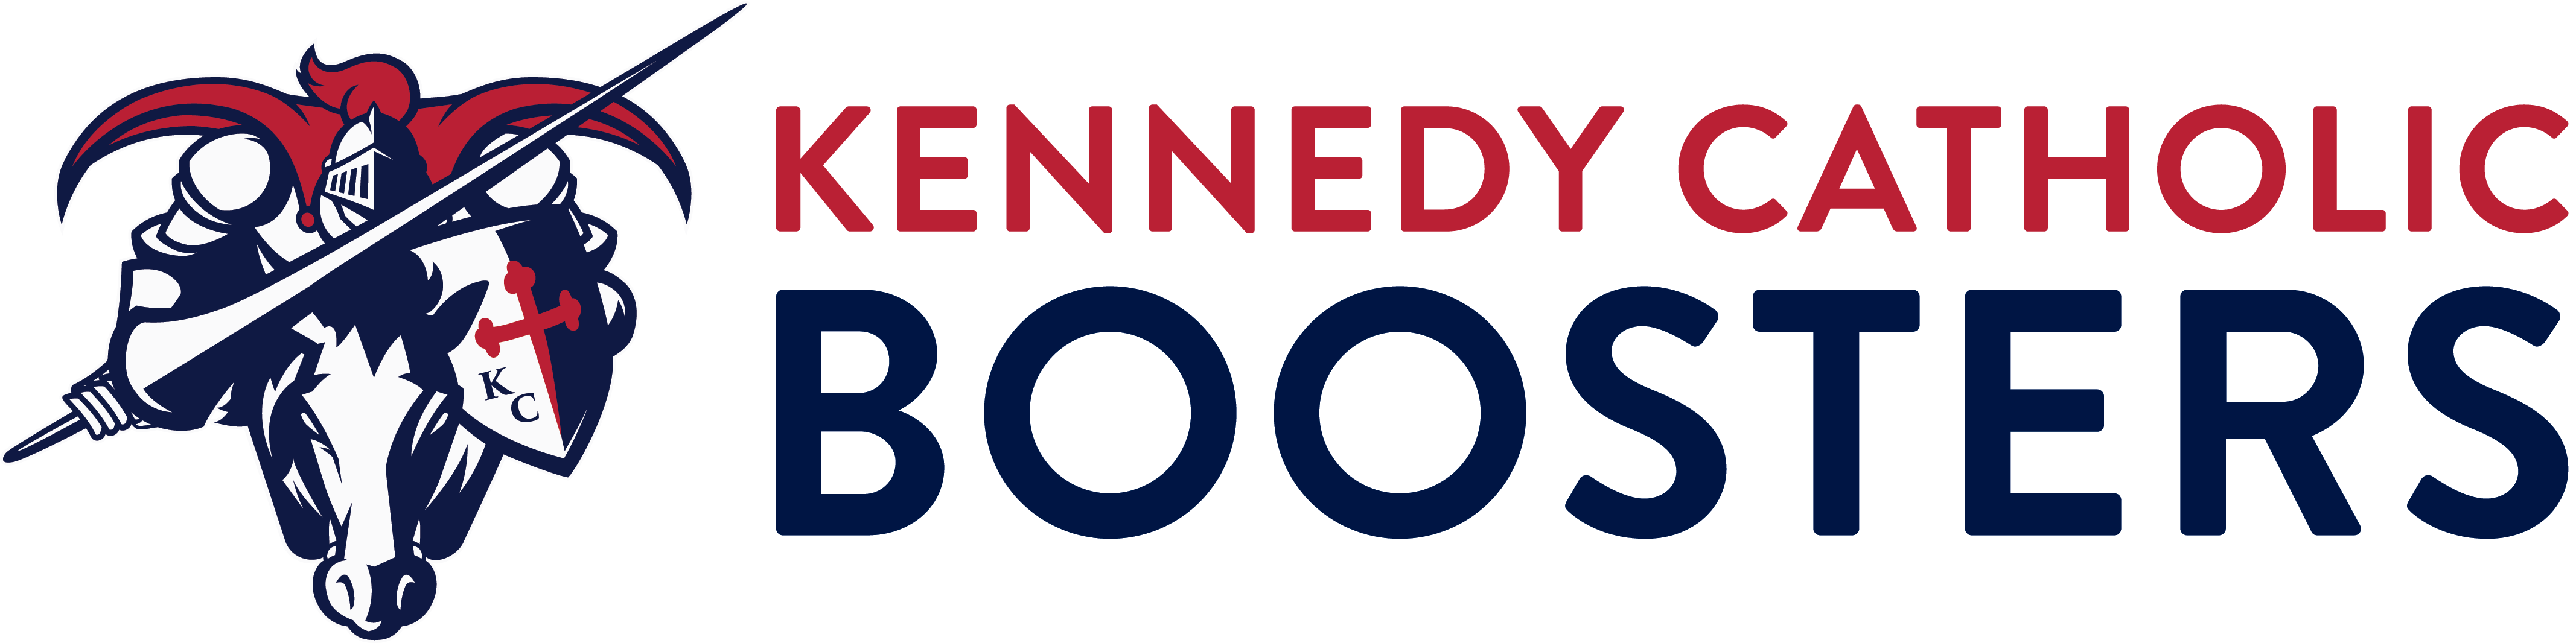 Kennedy Catholic Boosters